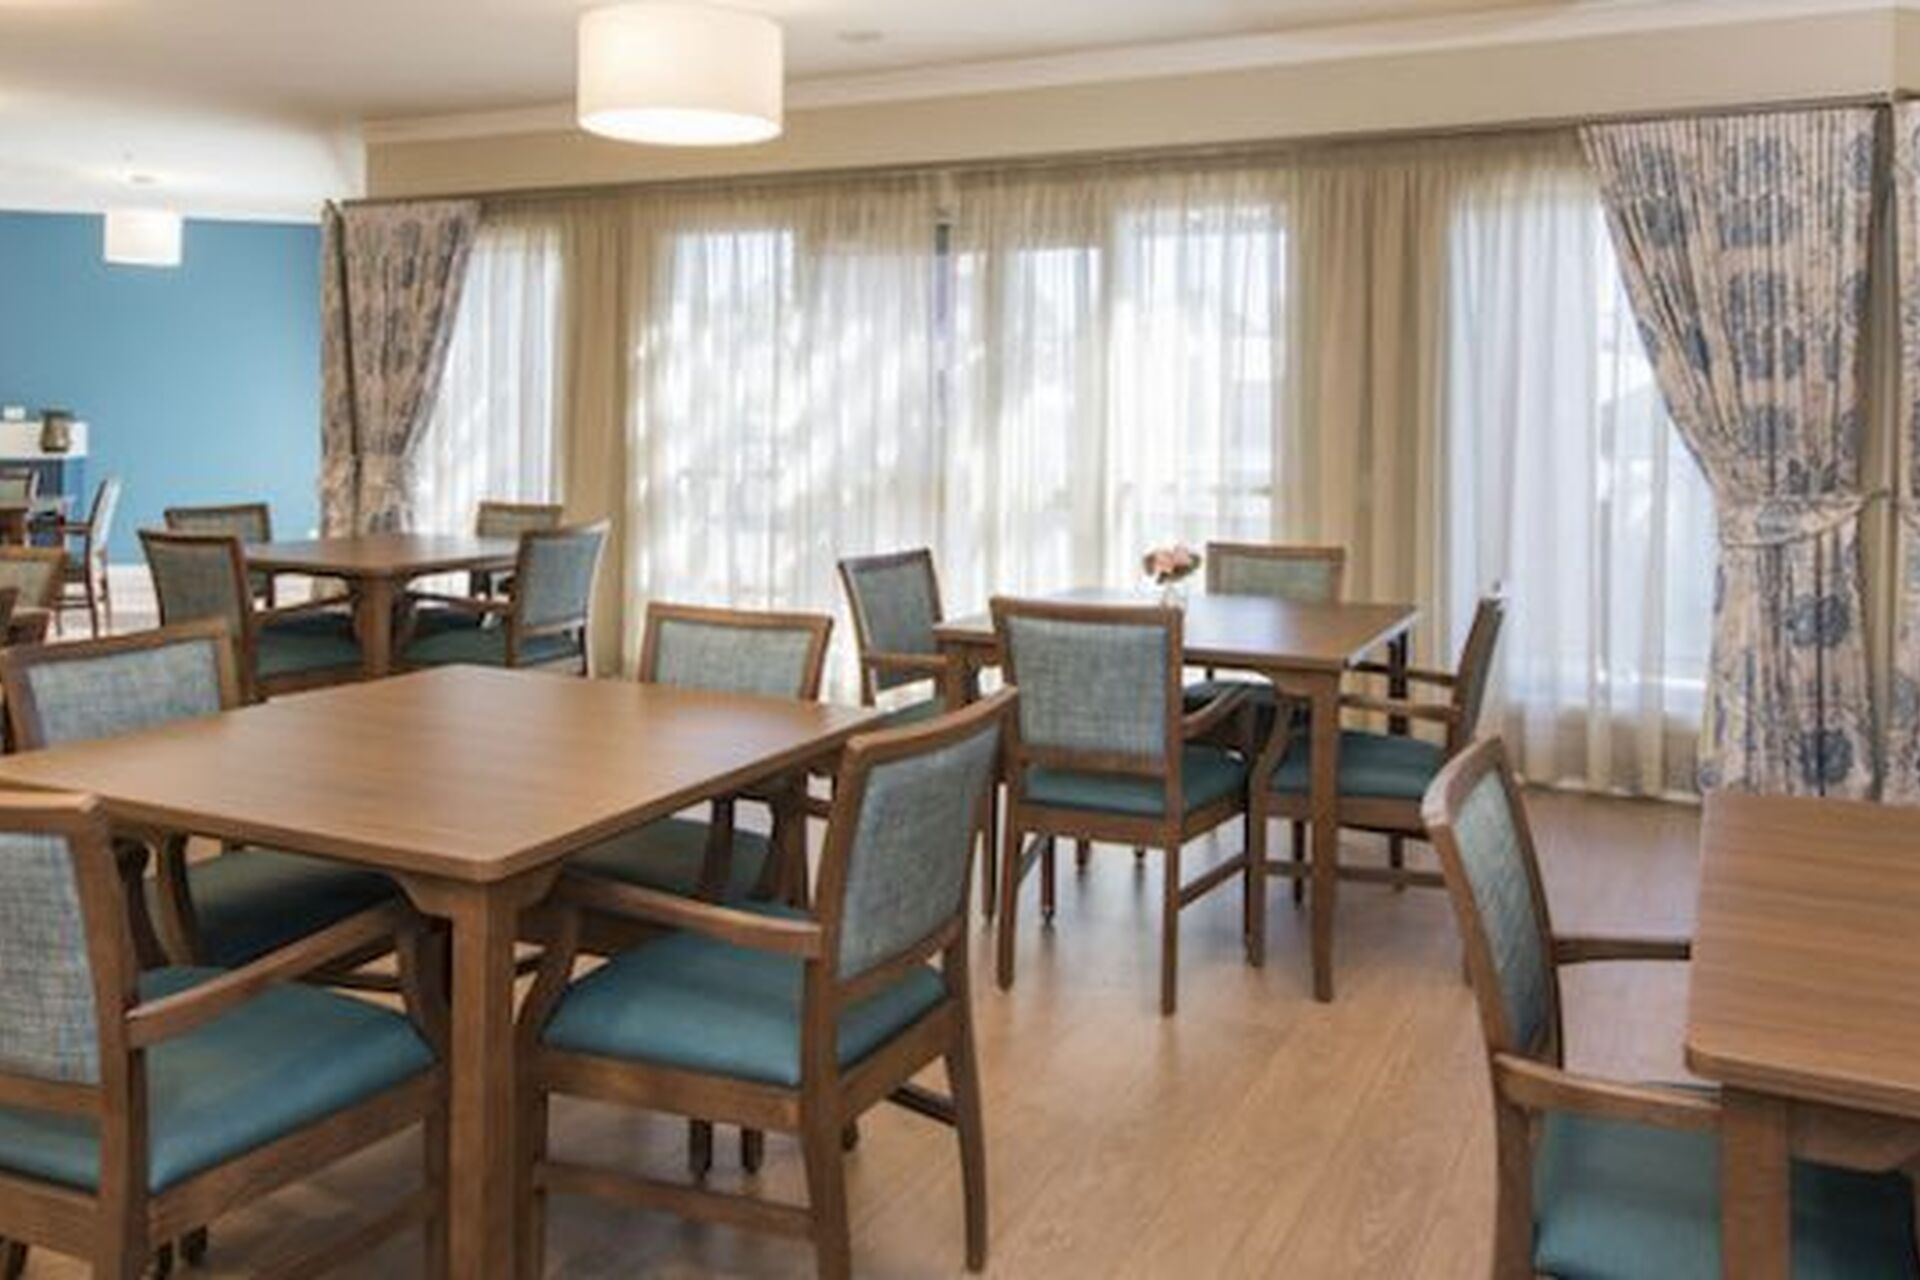 large dining room serving fresh meals to nursing home residents at baptistcare kintyre lodge residential aged care home in dubbo